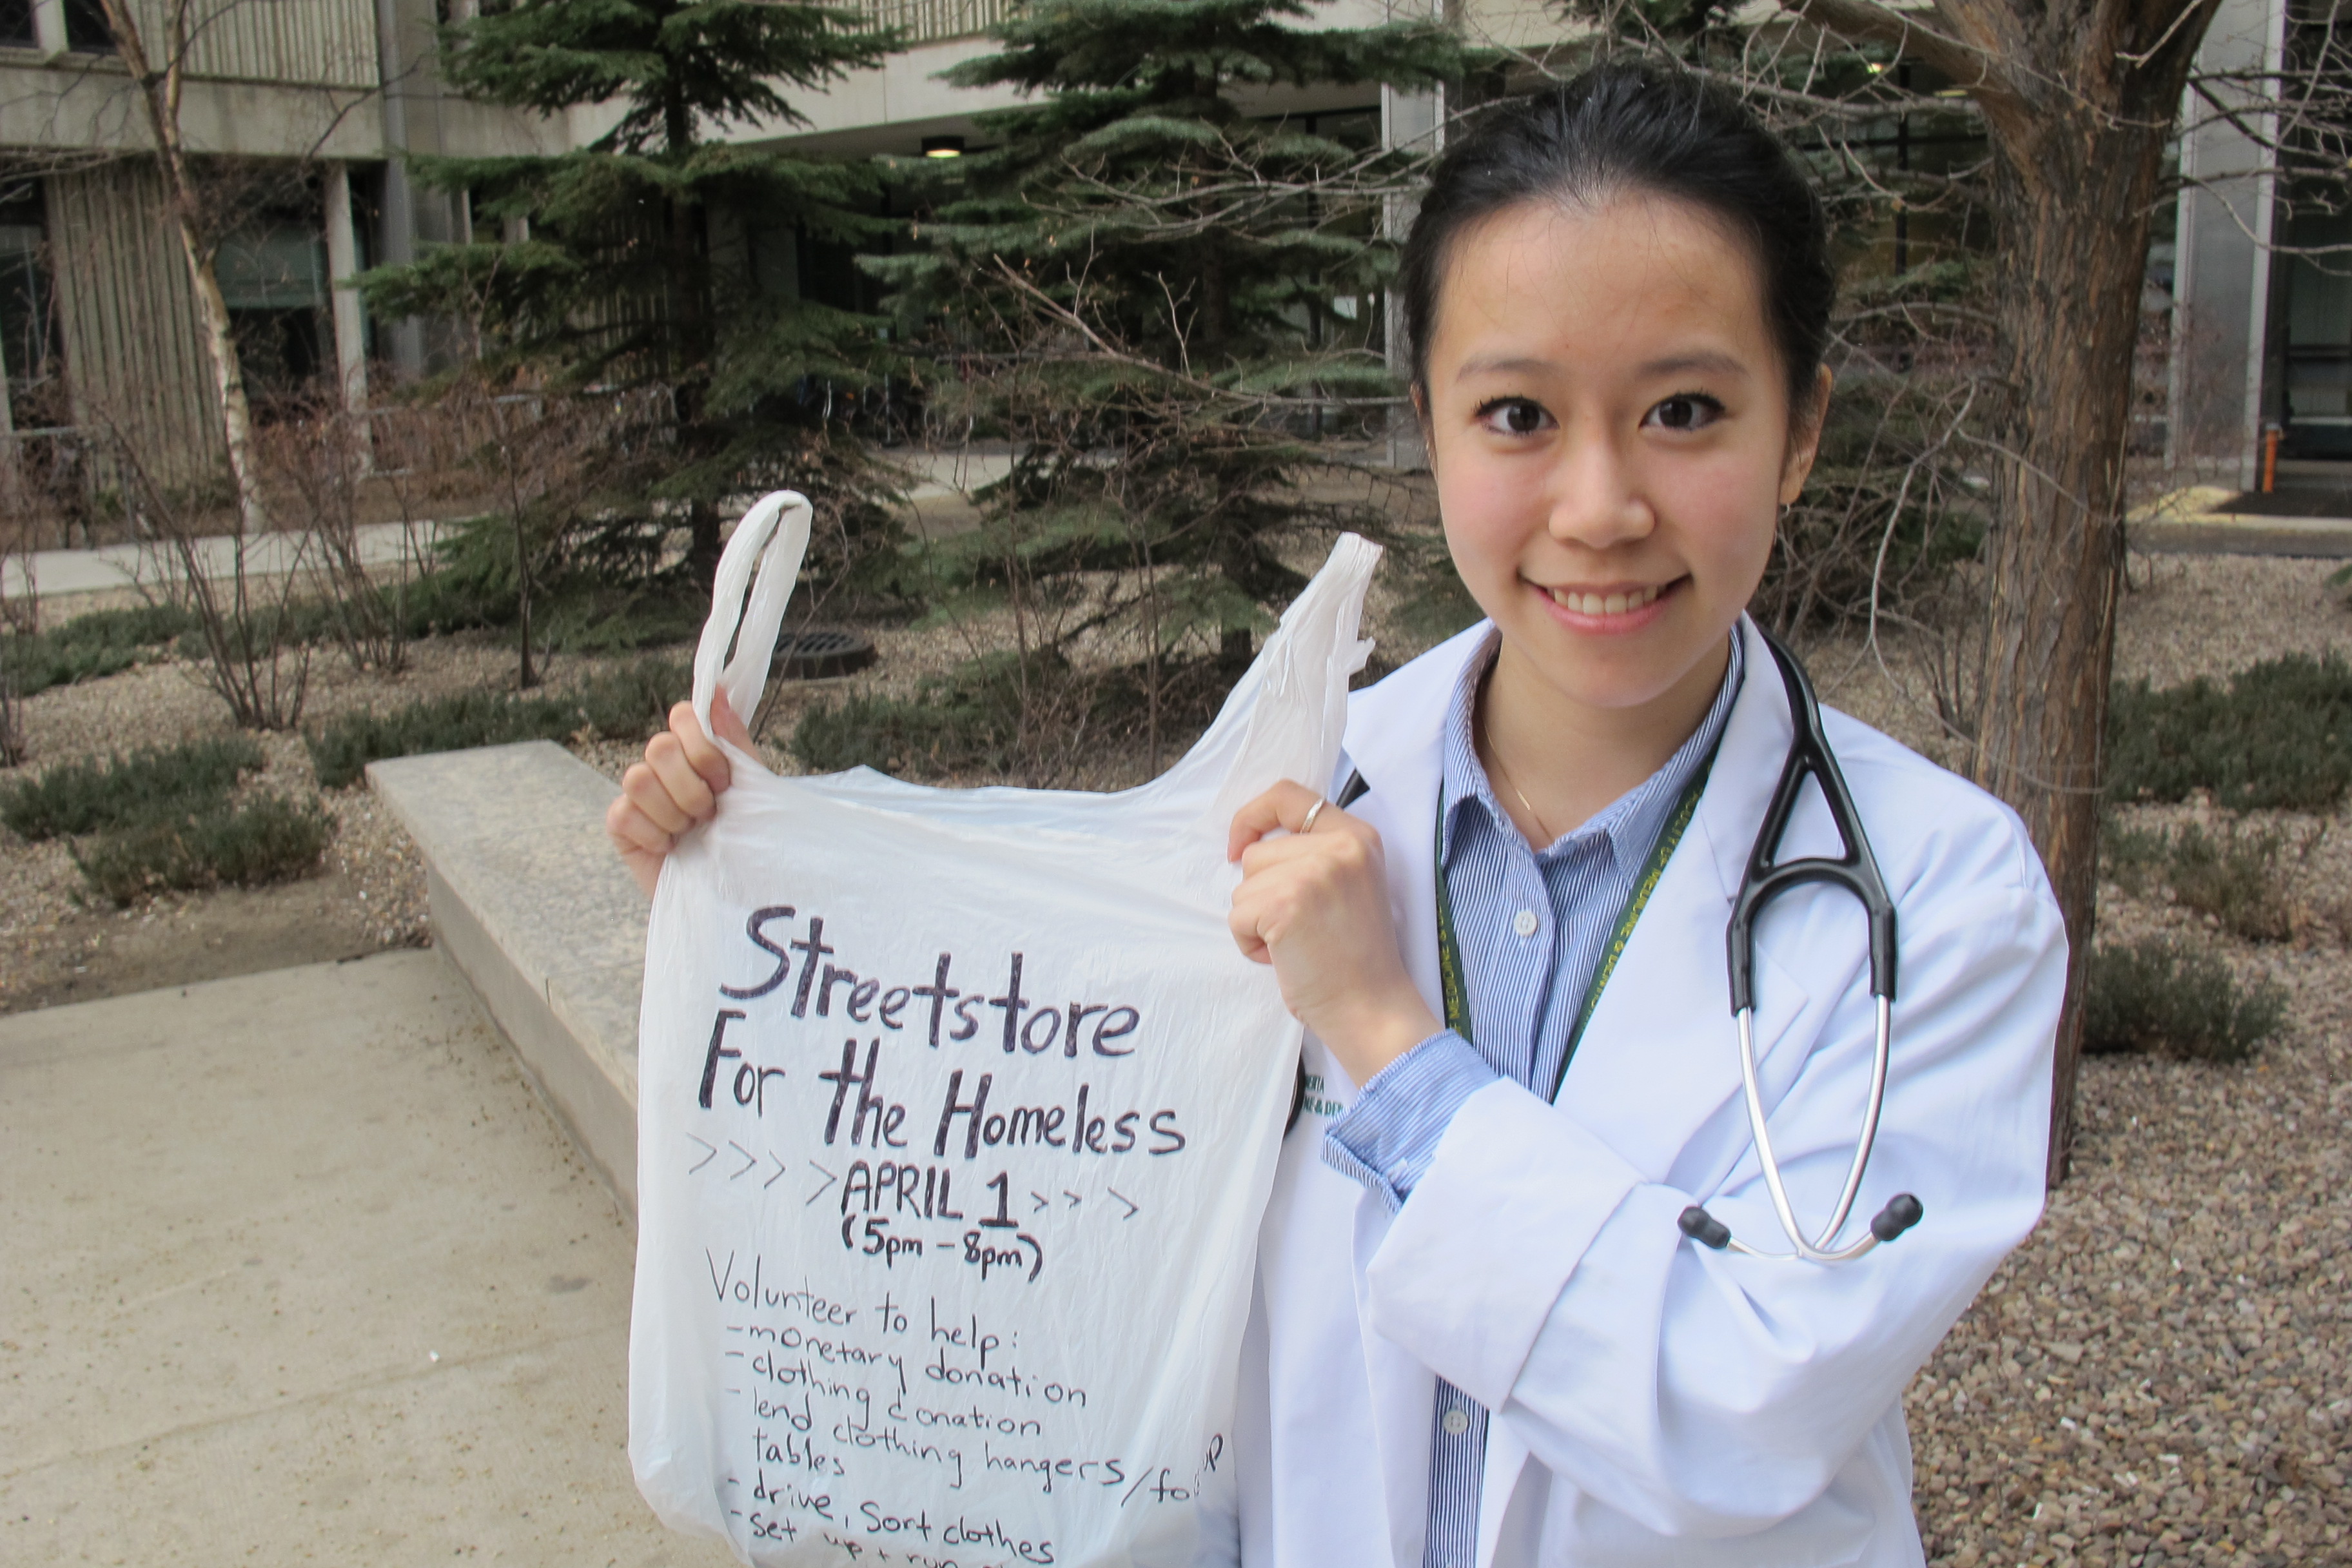 Medical student Jessica Luc has partnered with the Helping Hands for Homeless Youth student organization to run a Street Store for the Homeless. 